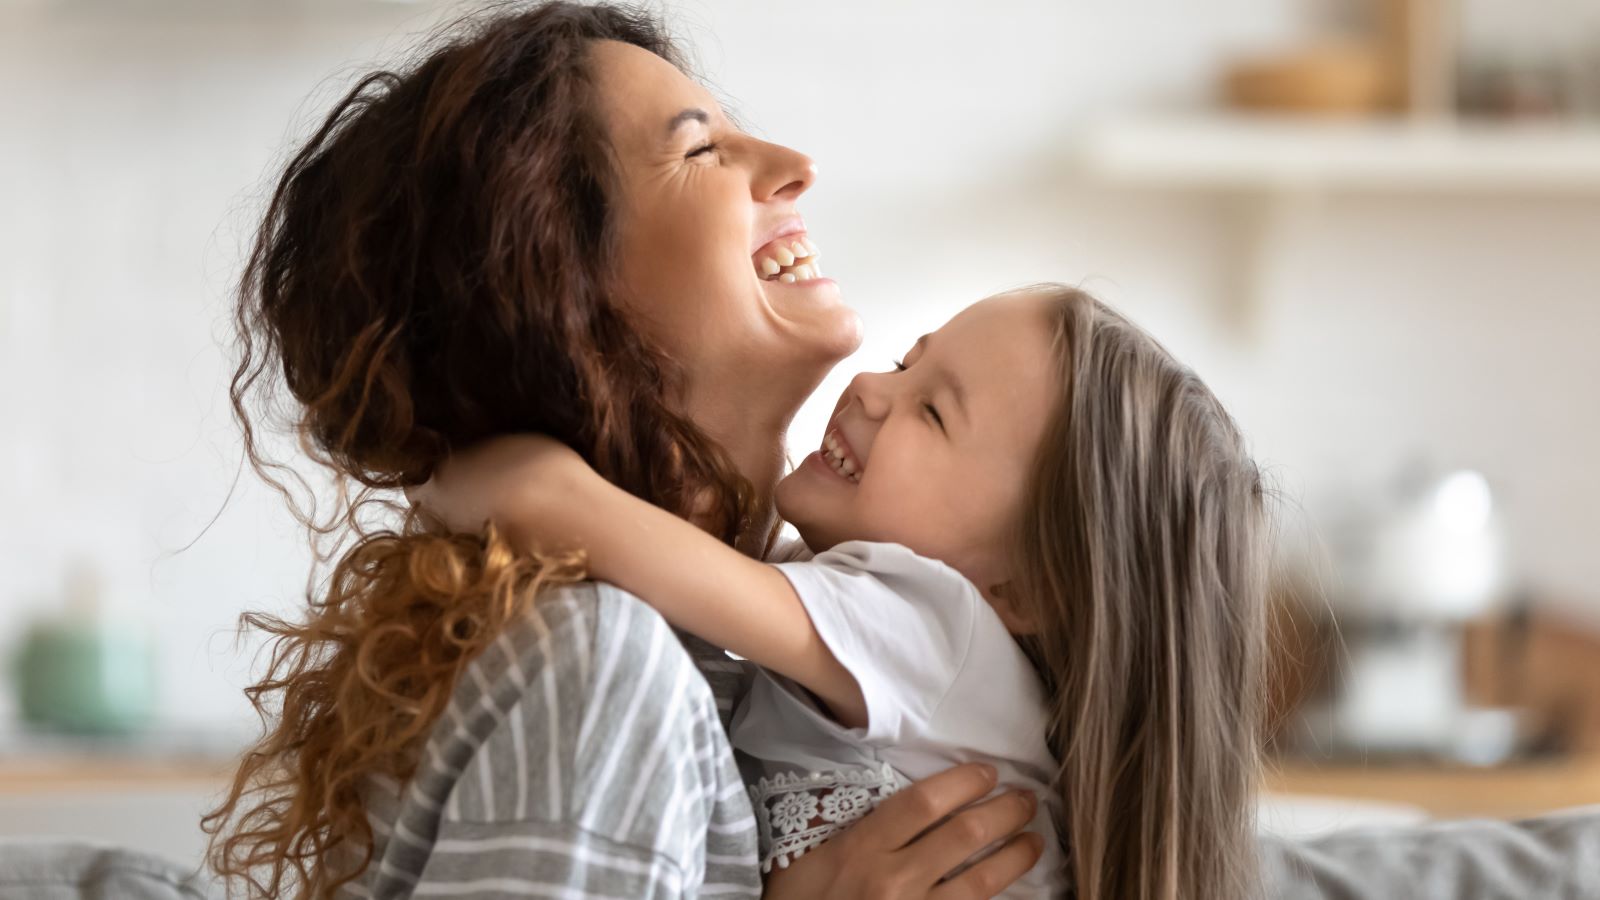 The 10 Most Important Lessons I taught My Daughter